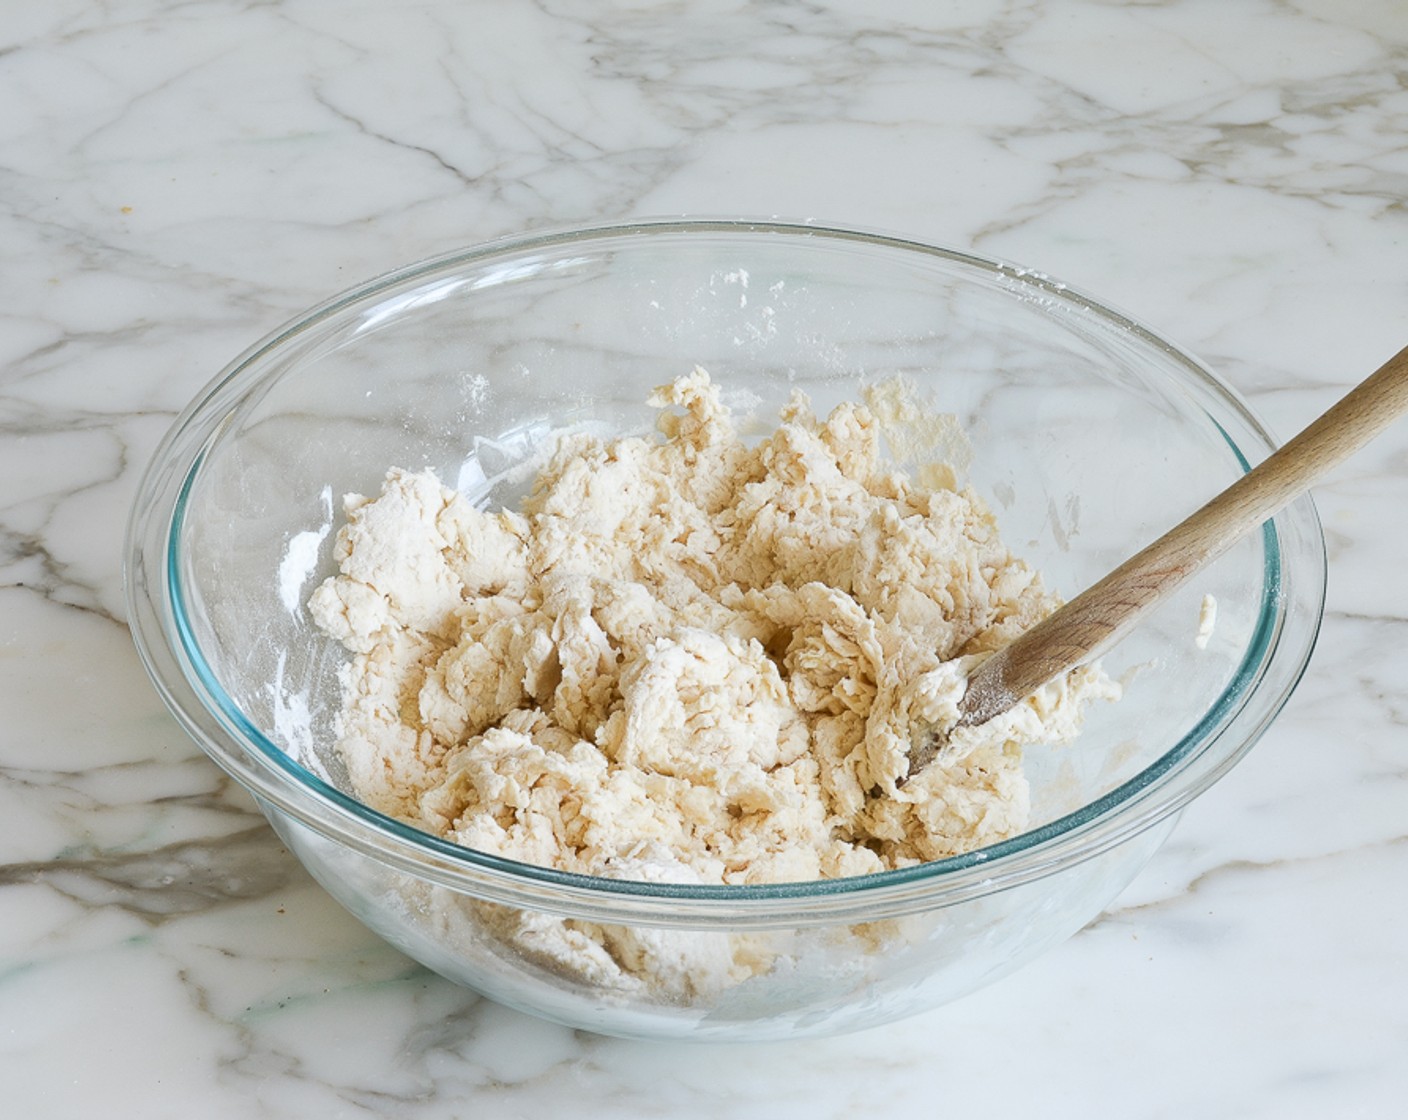 step 5 Add Unsalted Butter (3 Tbsp) and Low-Fat Buttermilk (1 1/4 cups) to the dry ingredients and stir with a wooden spoon until the liquid is absorbed (the dough will be sticky and look shaggy), about 30 seconds.